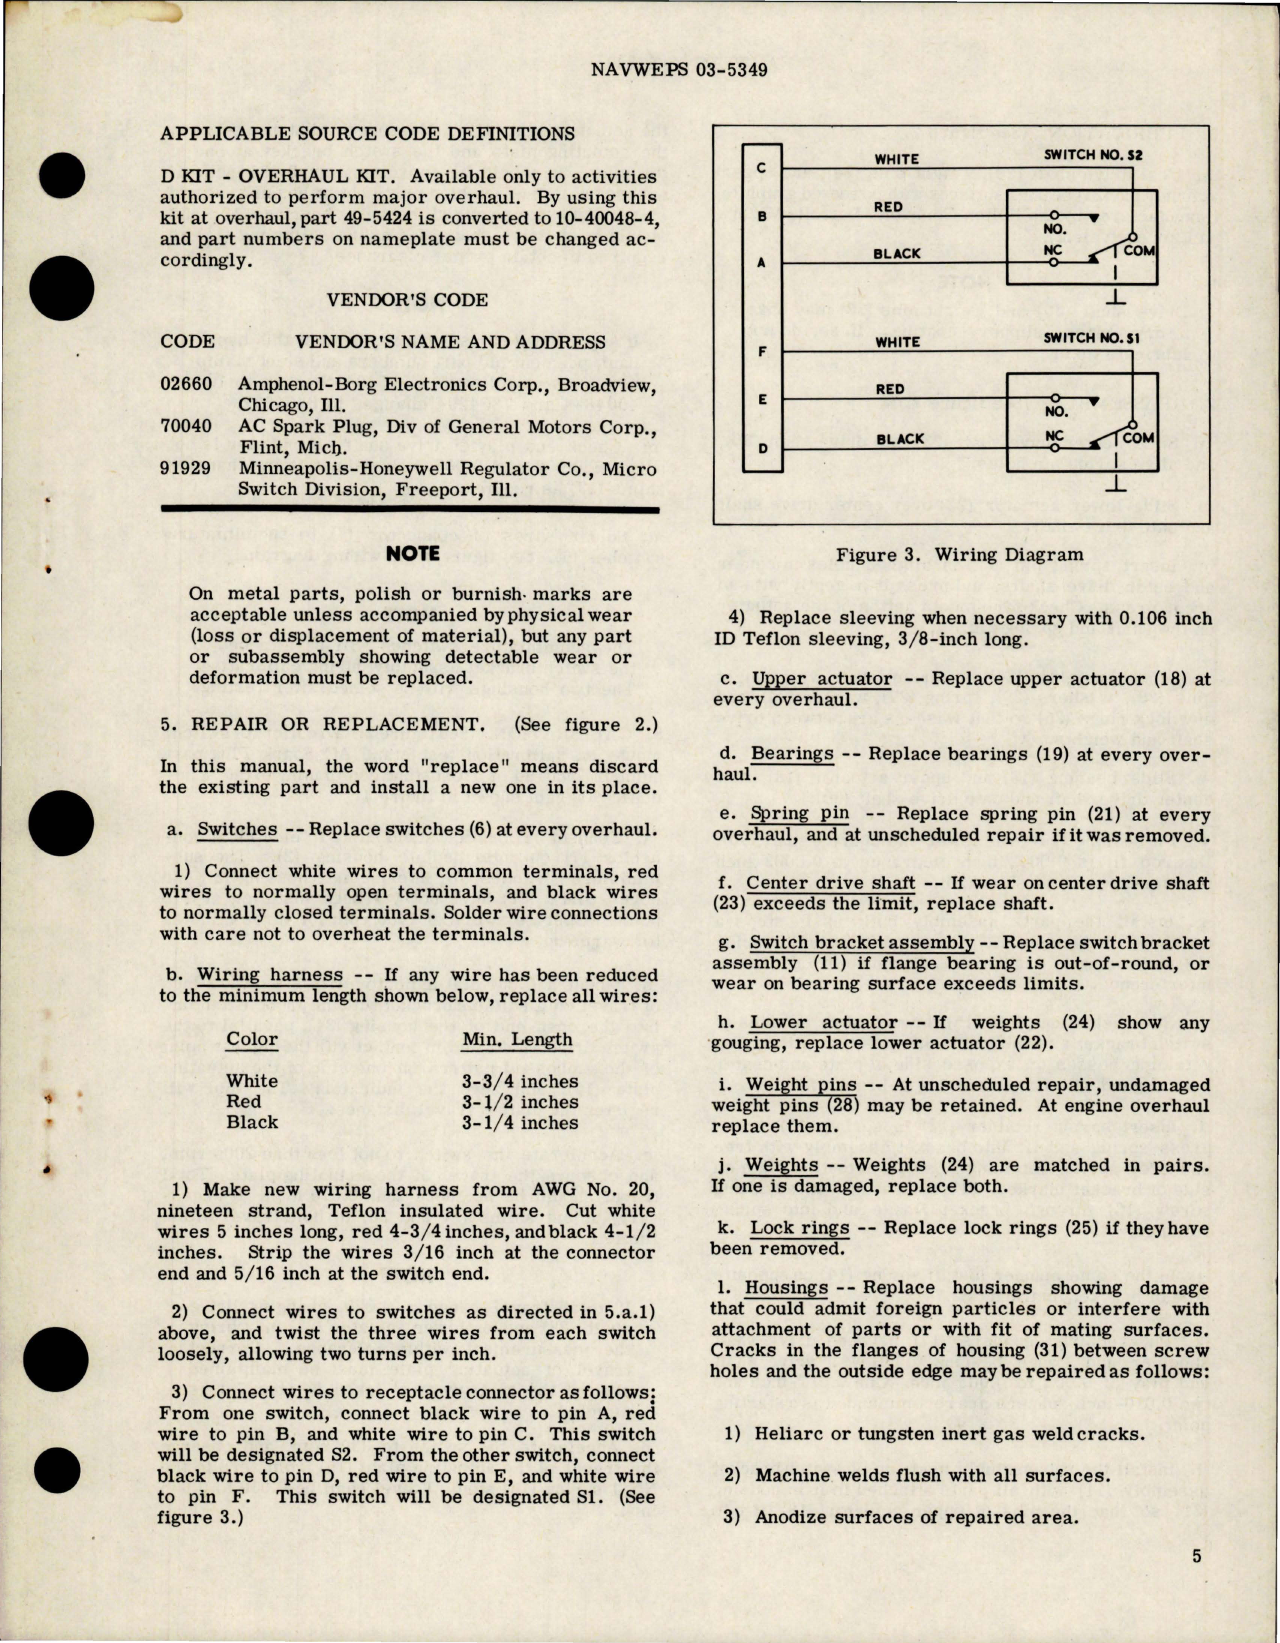 Sample page 5 from AirCorps Library document: Overhaul Instructions with Parts Breakdown for Speed Monitor - Boeing Part 10-40048 and 49-5424